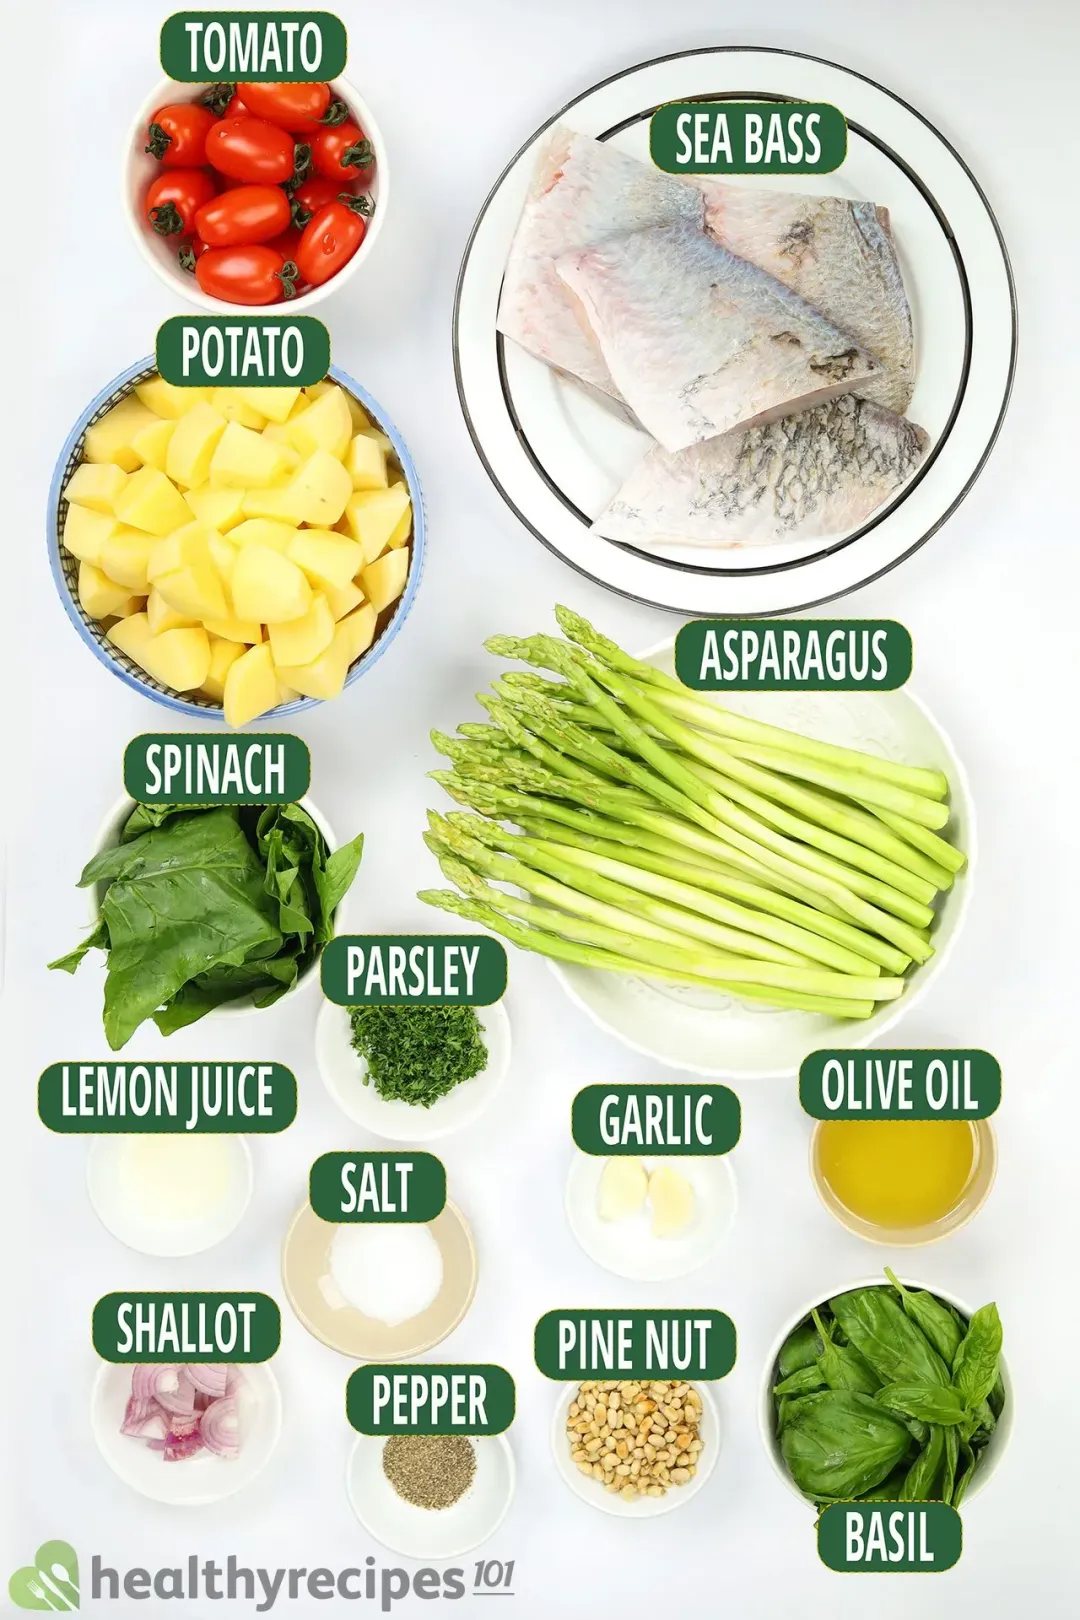 Ingredients for Pesto Sea Bass